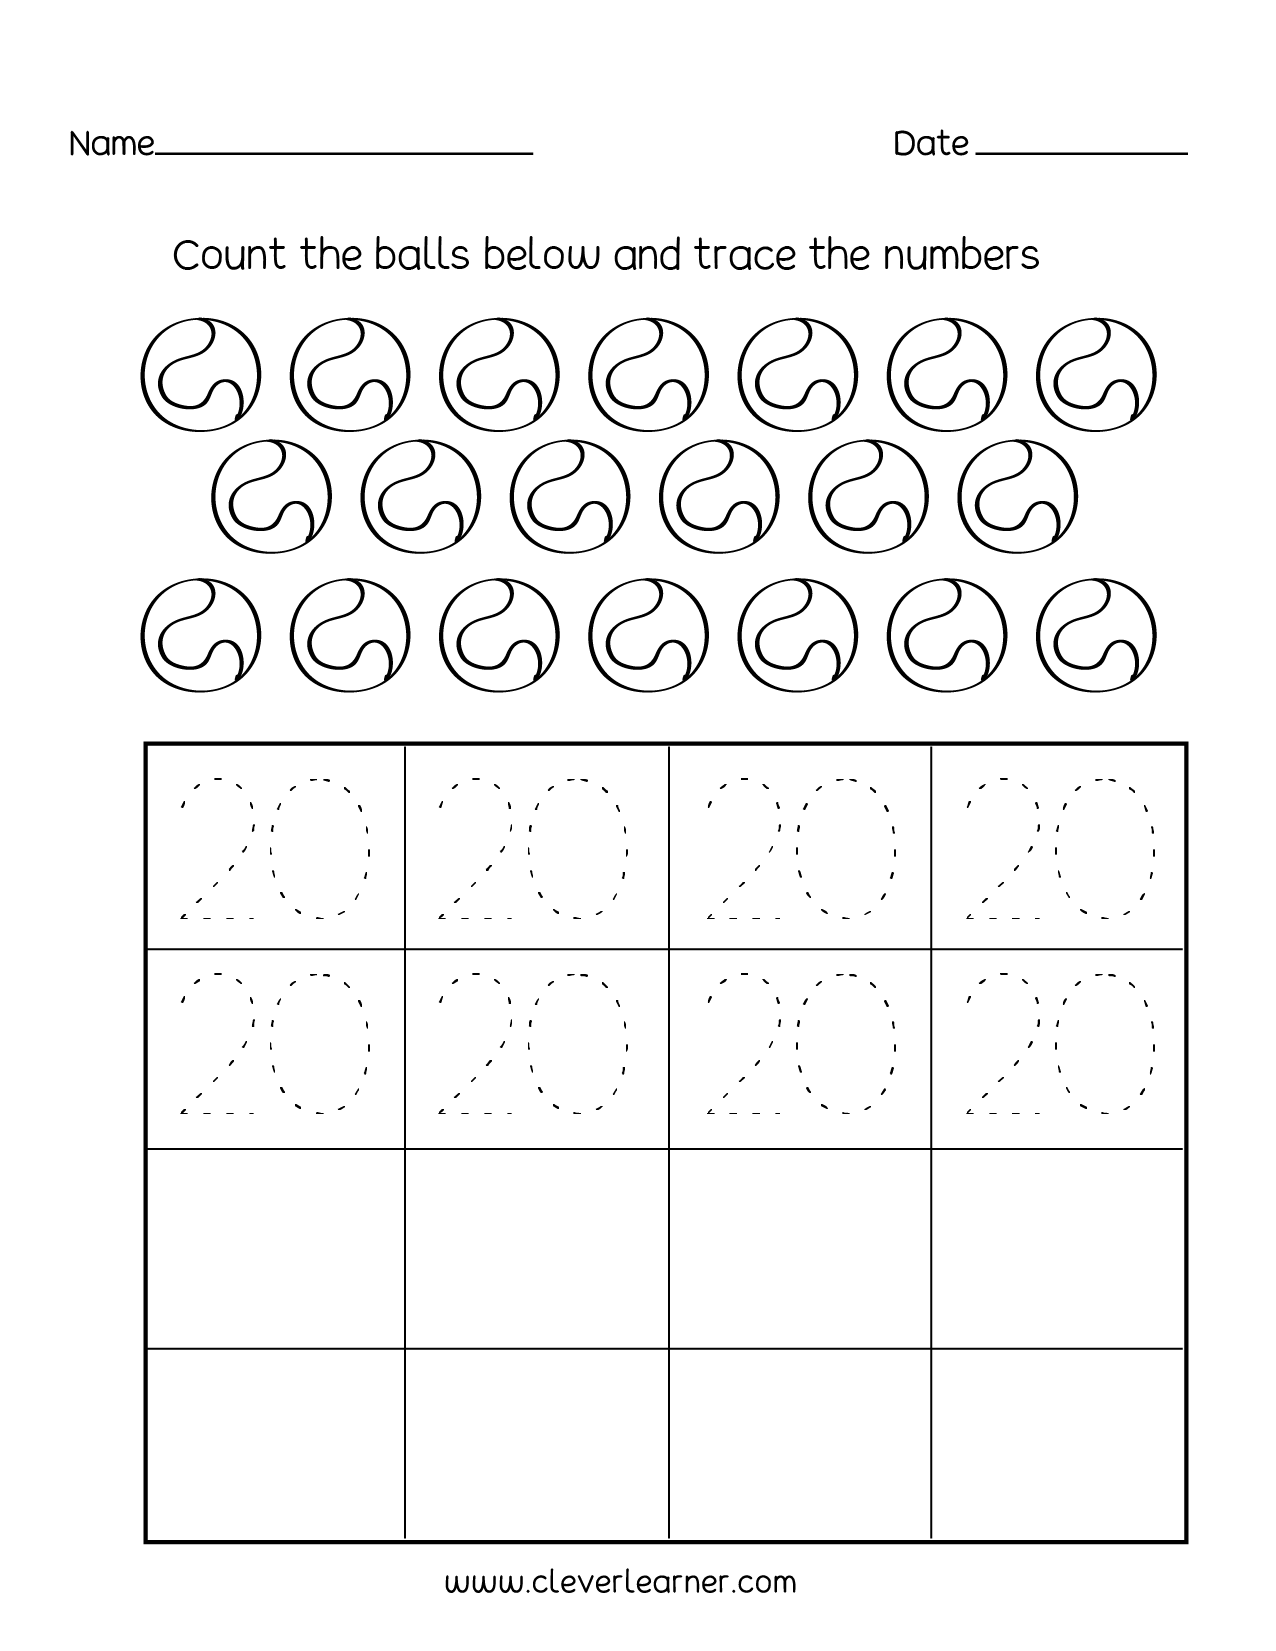 more-and-less-worksheets-for-preschool